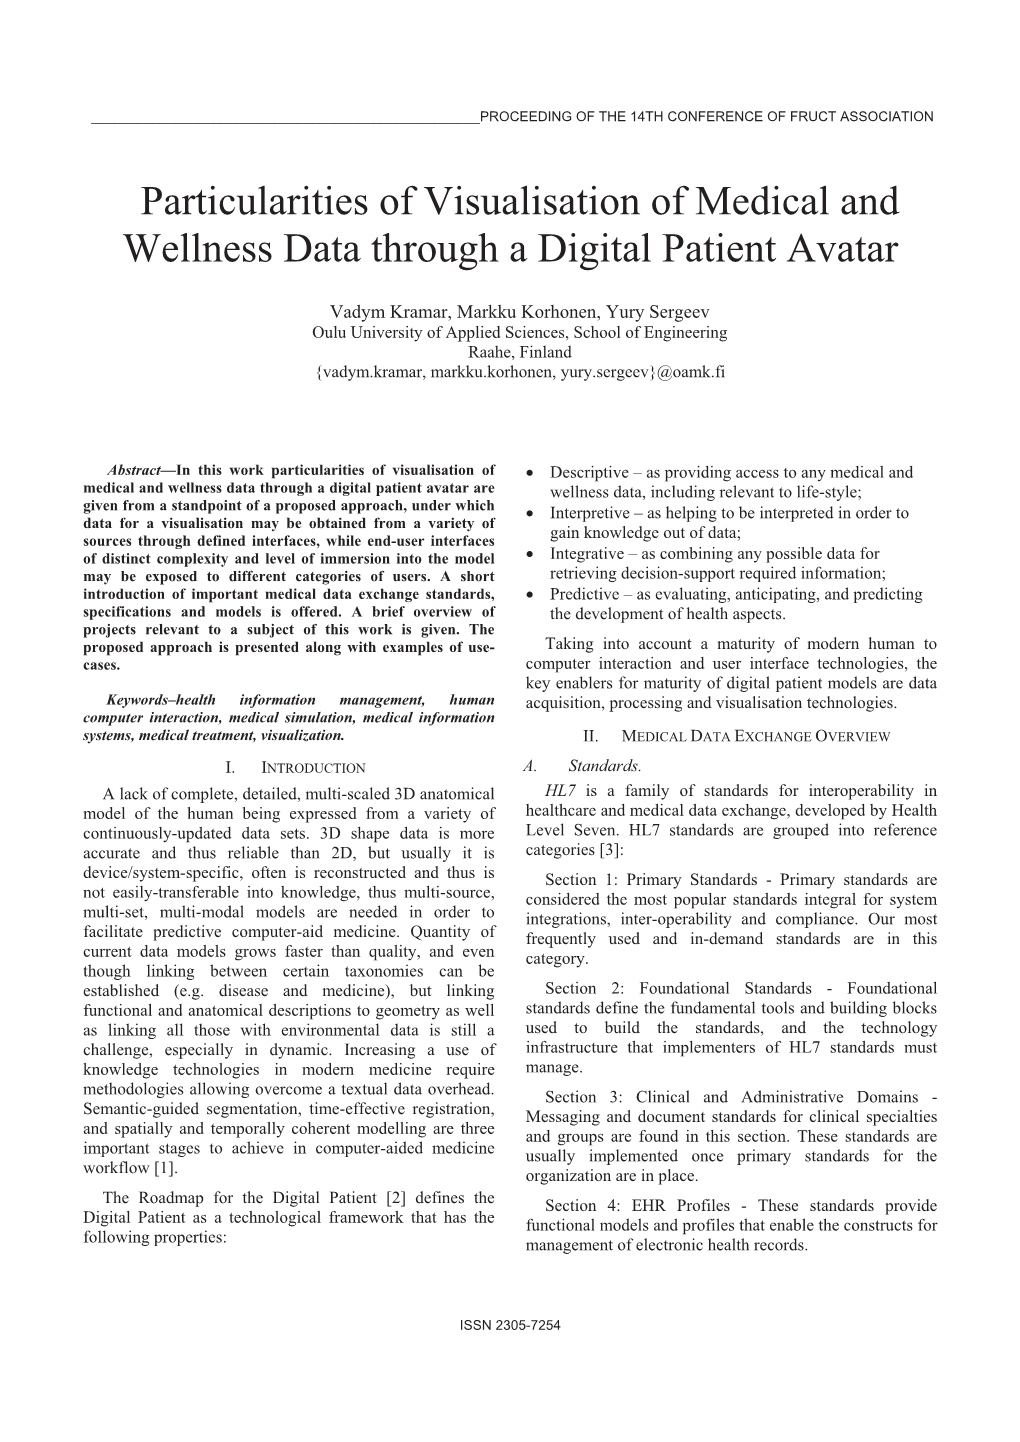 Particularities of Visualisation of Medical and Wellness Data Through a Digital Patient Avatar